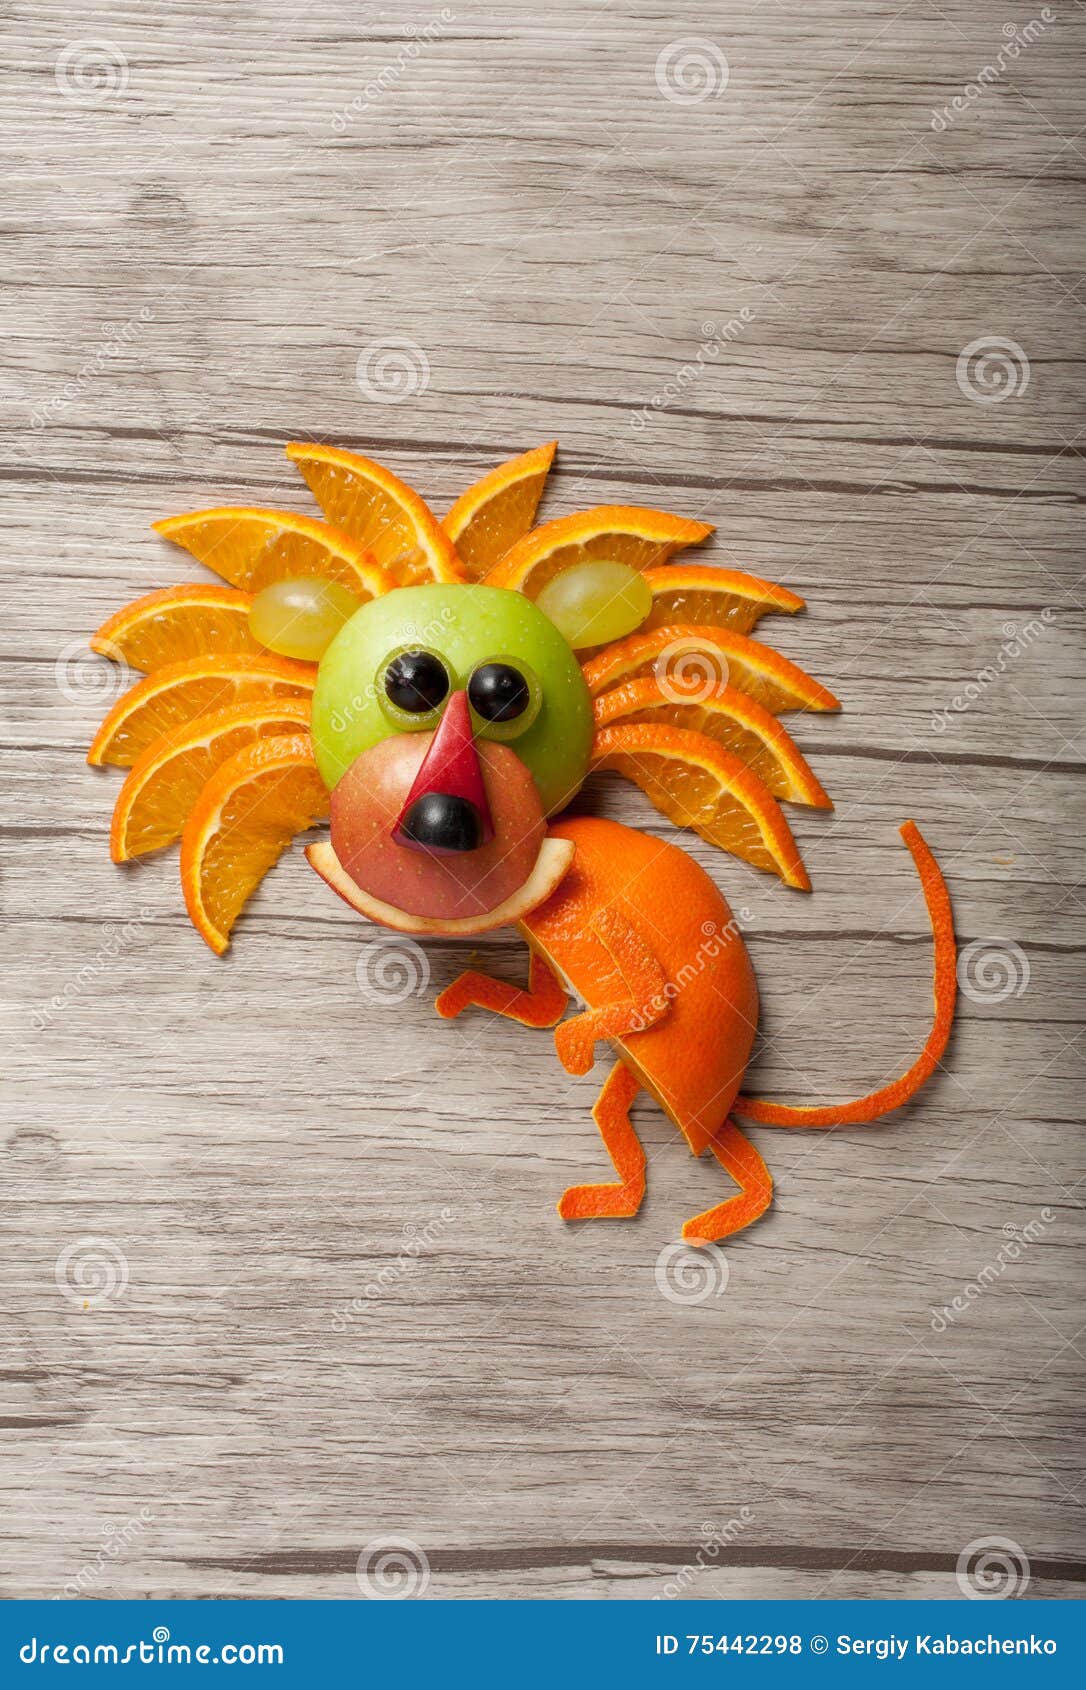 Amusing Lion Made of Fruits Stock Photo - Image of animal, healthy: 75442298